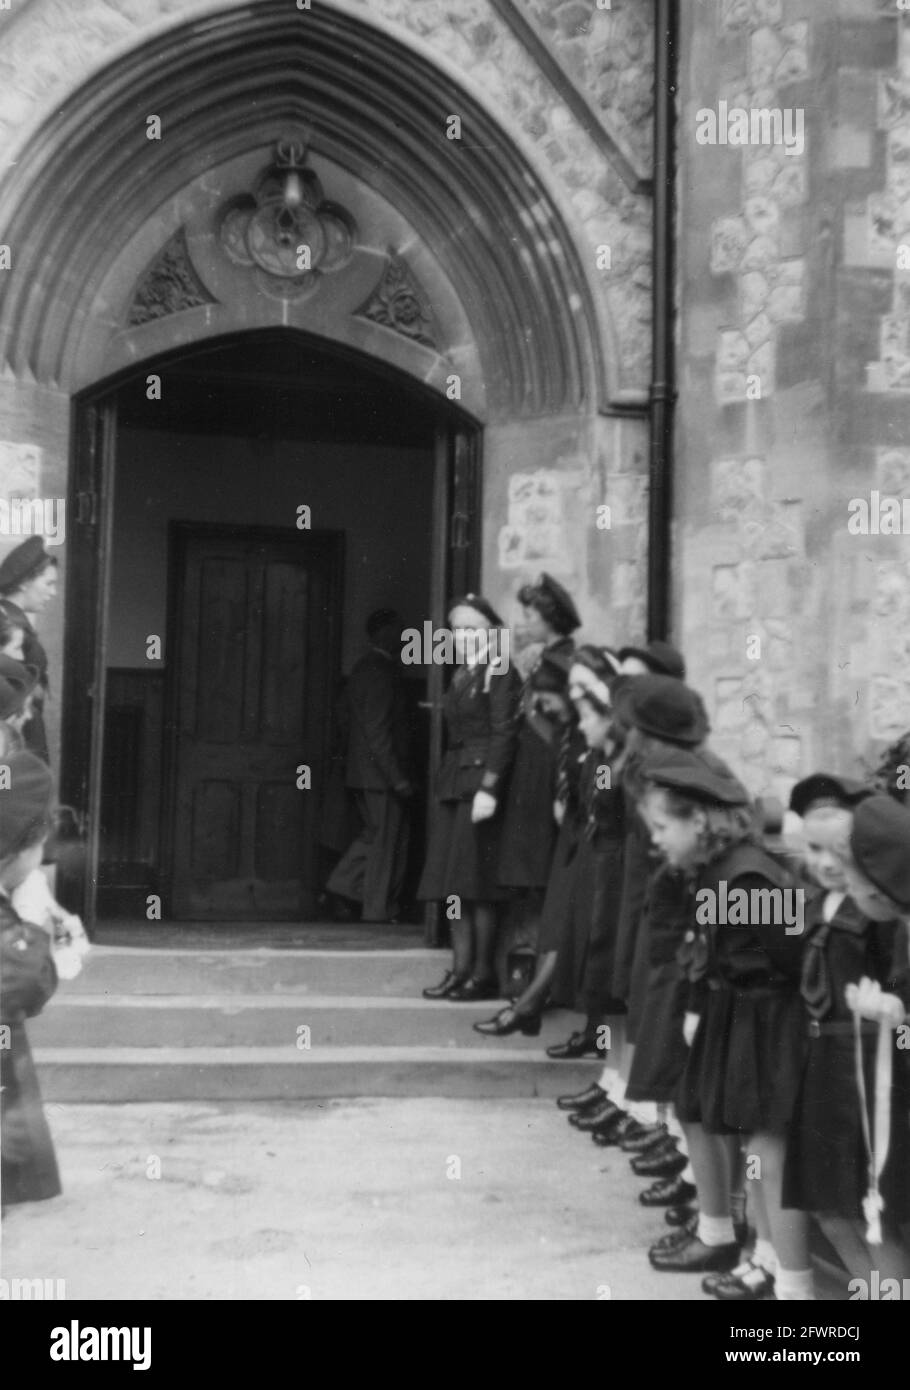 Members of The Girls’ Life Brigade forming a guard of honour at the entrance of the United Reformed Church, Bexley, South-East London. Late 1940s. Stock Photo